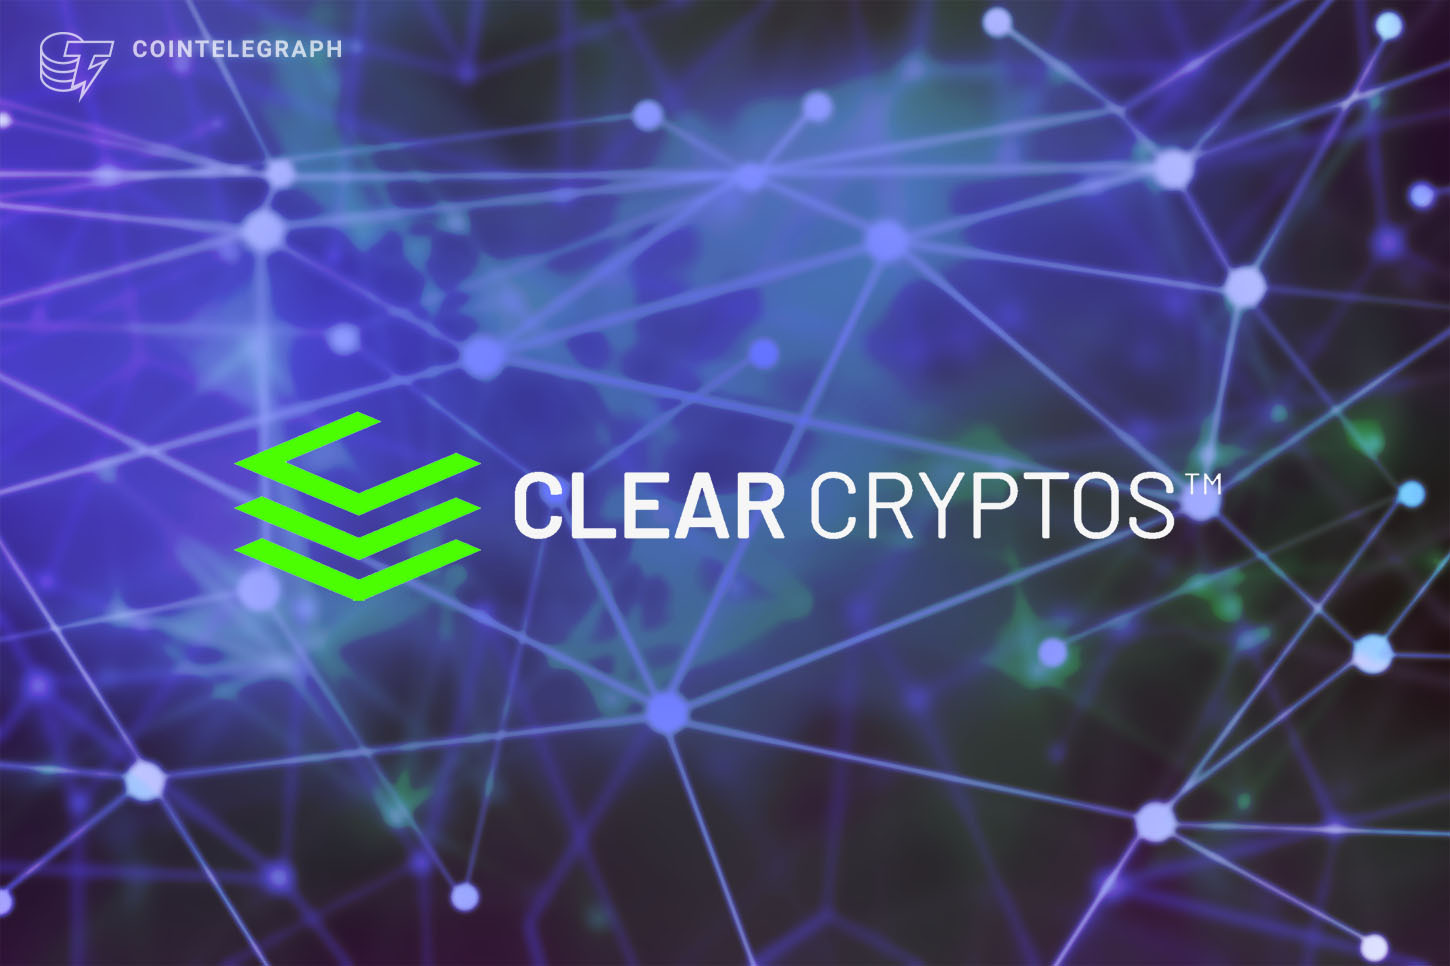 USFCR partners with ClearCryptos LLC. to accelerate enterprise adoption of Web 3.0 and Blockchain